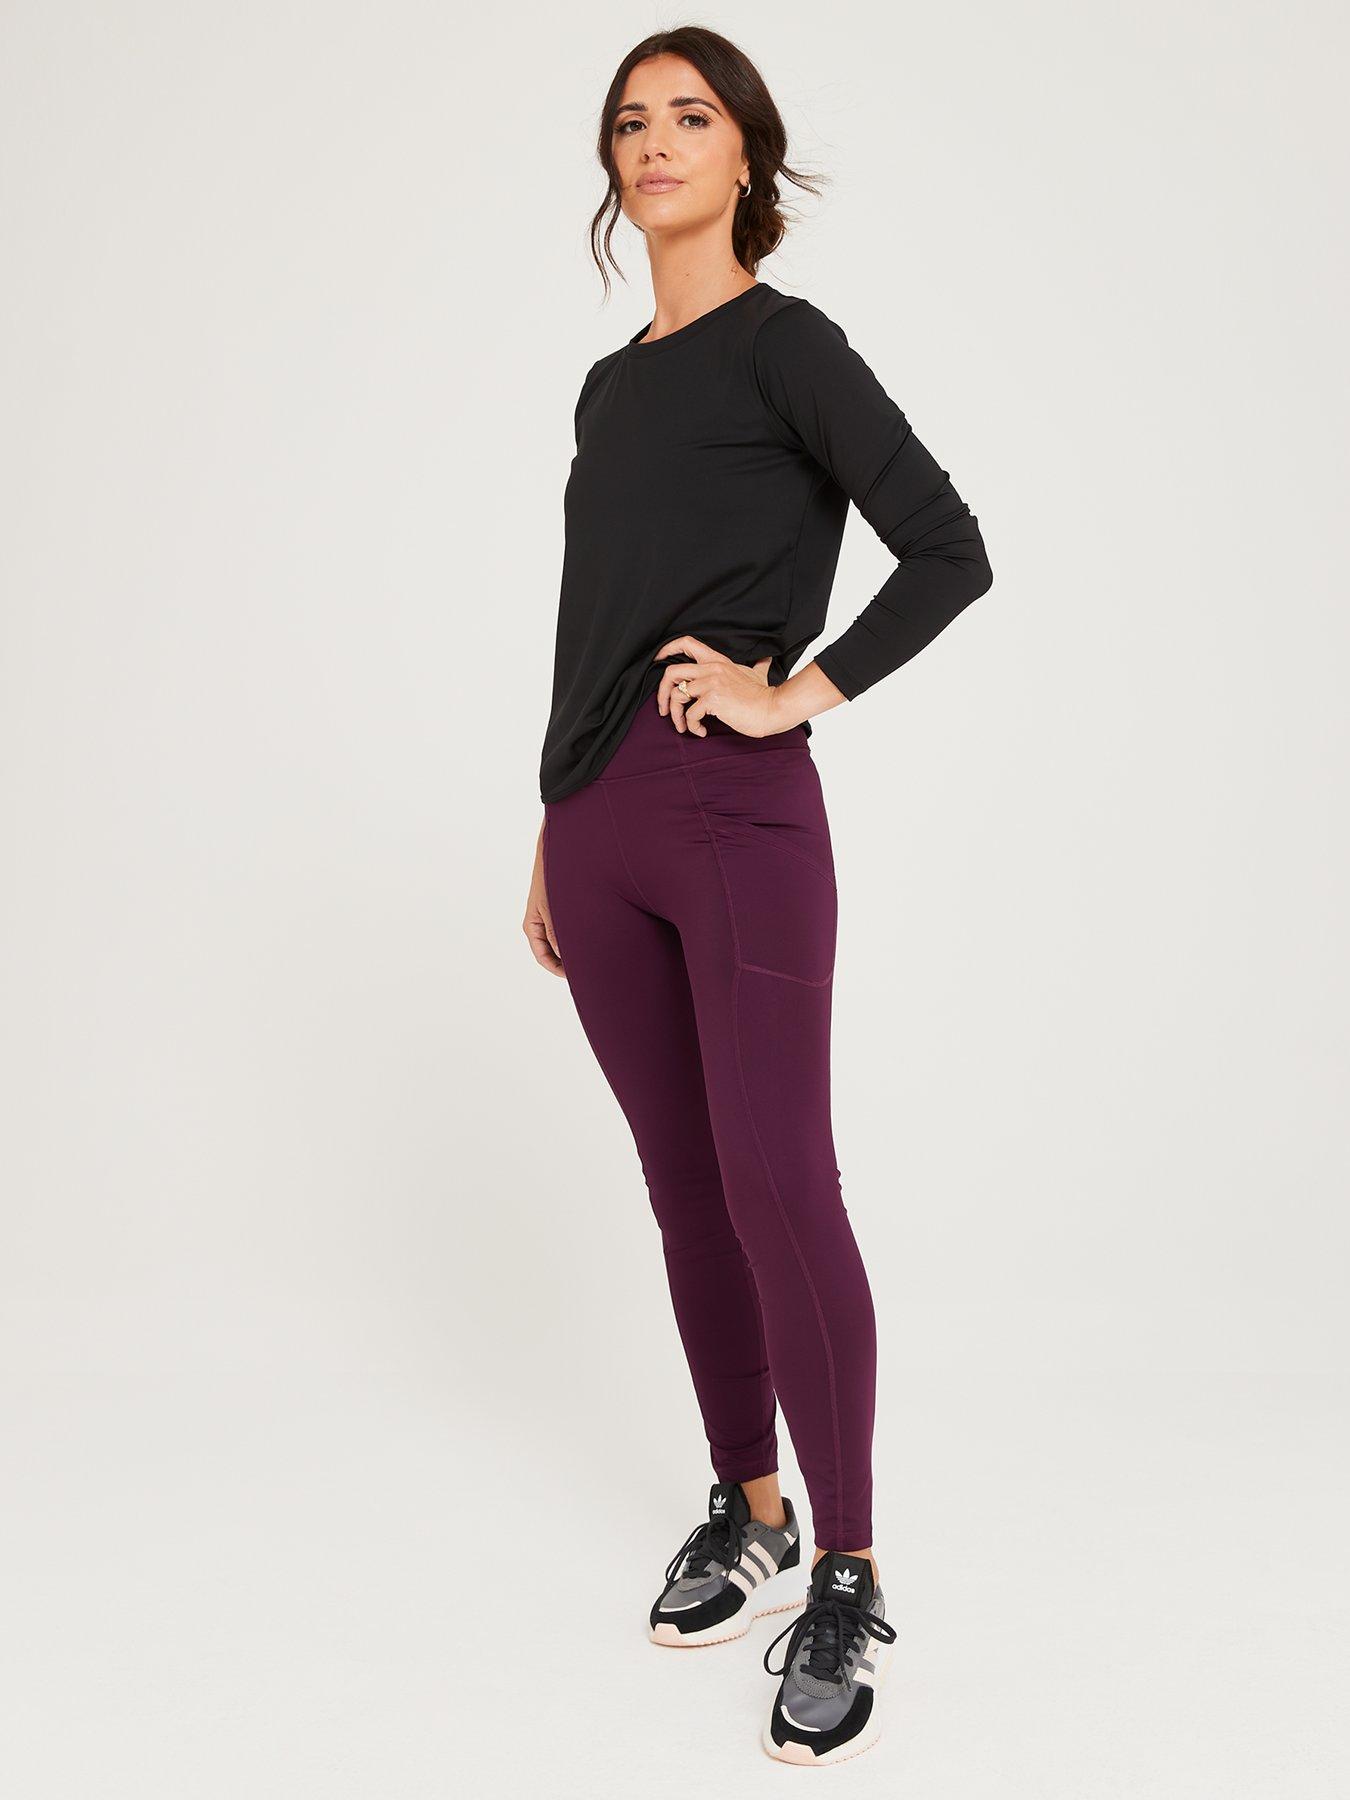 Lucy Mecklenburgh Lucy Mecklenburgh x V by Very Training Leggings